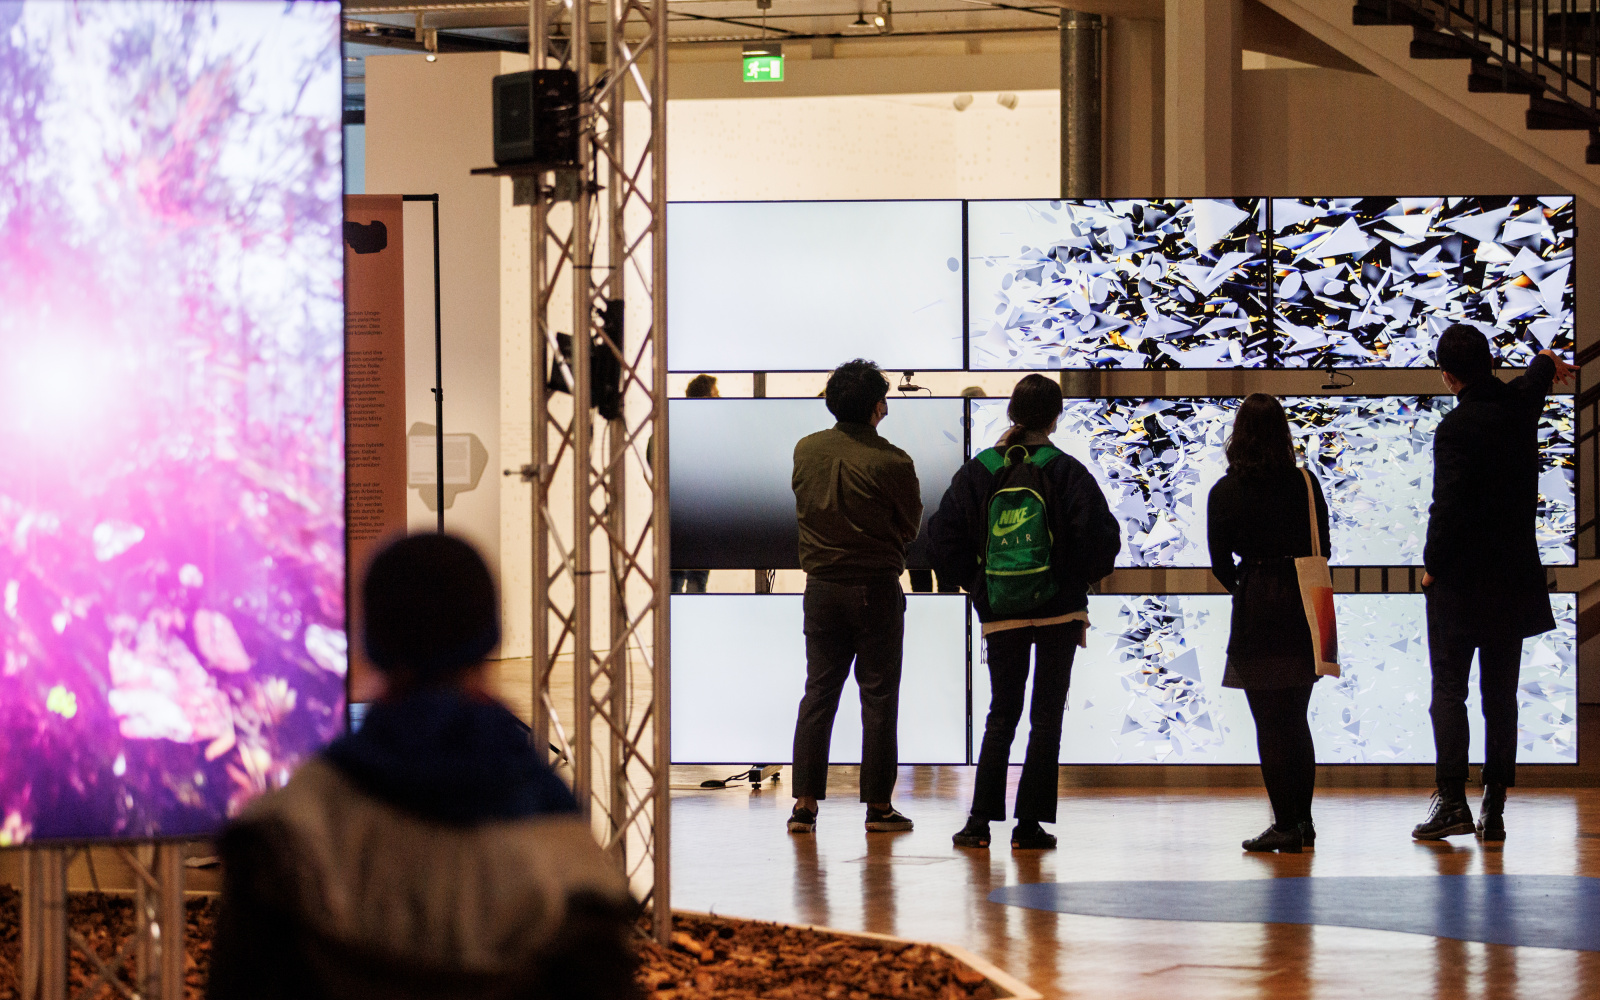 Random International, »Algorithmic Swarm Study (Triptych) / ll«, 2021. Several people can be seen in front of nine rectangularly arranged screens in the BioMedien exhibitions.